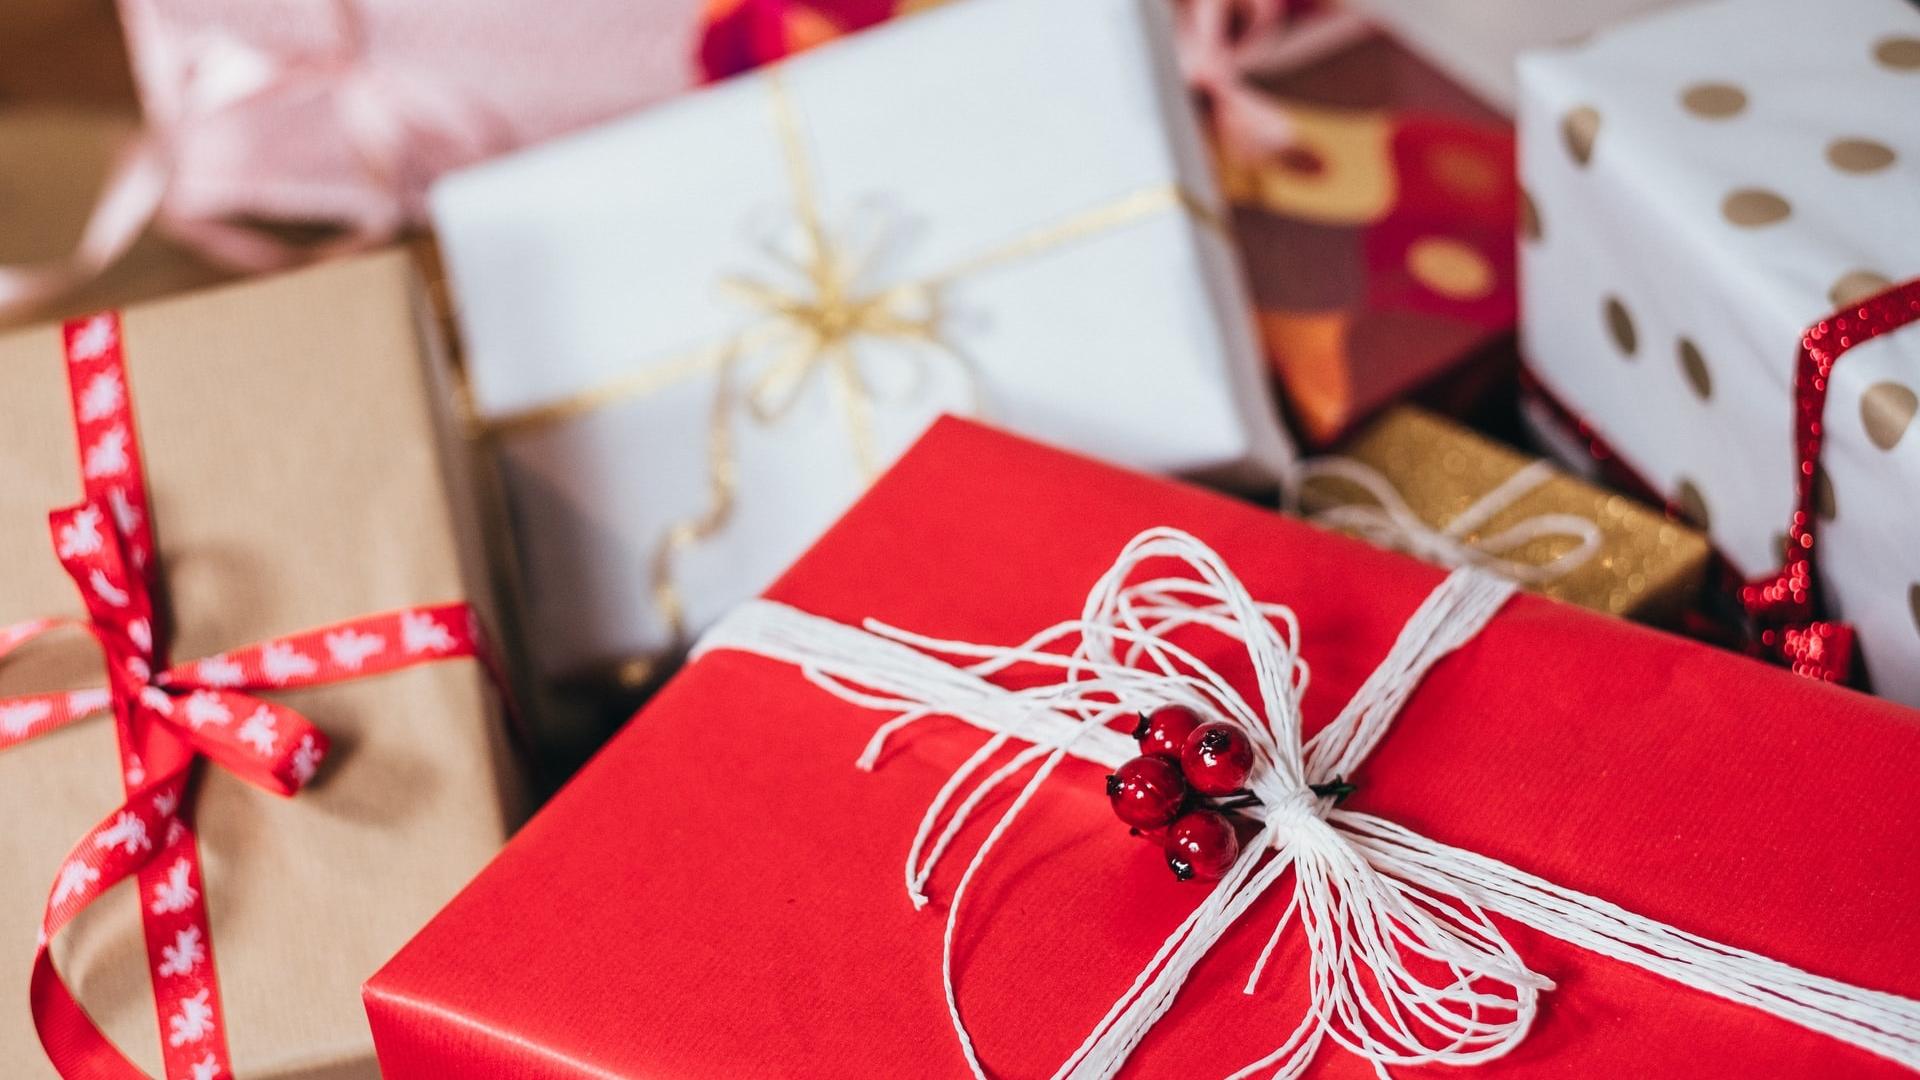 Season's Greetings: A Few Reminders on Holiday Gifts and Ethics